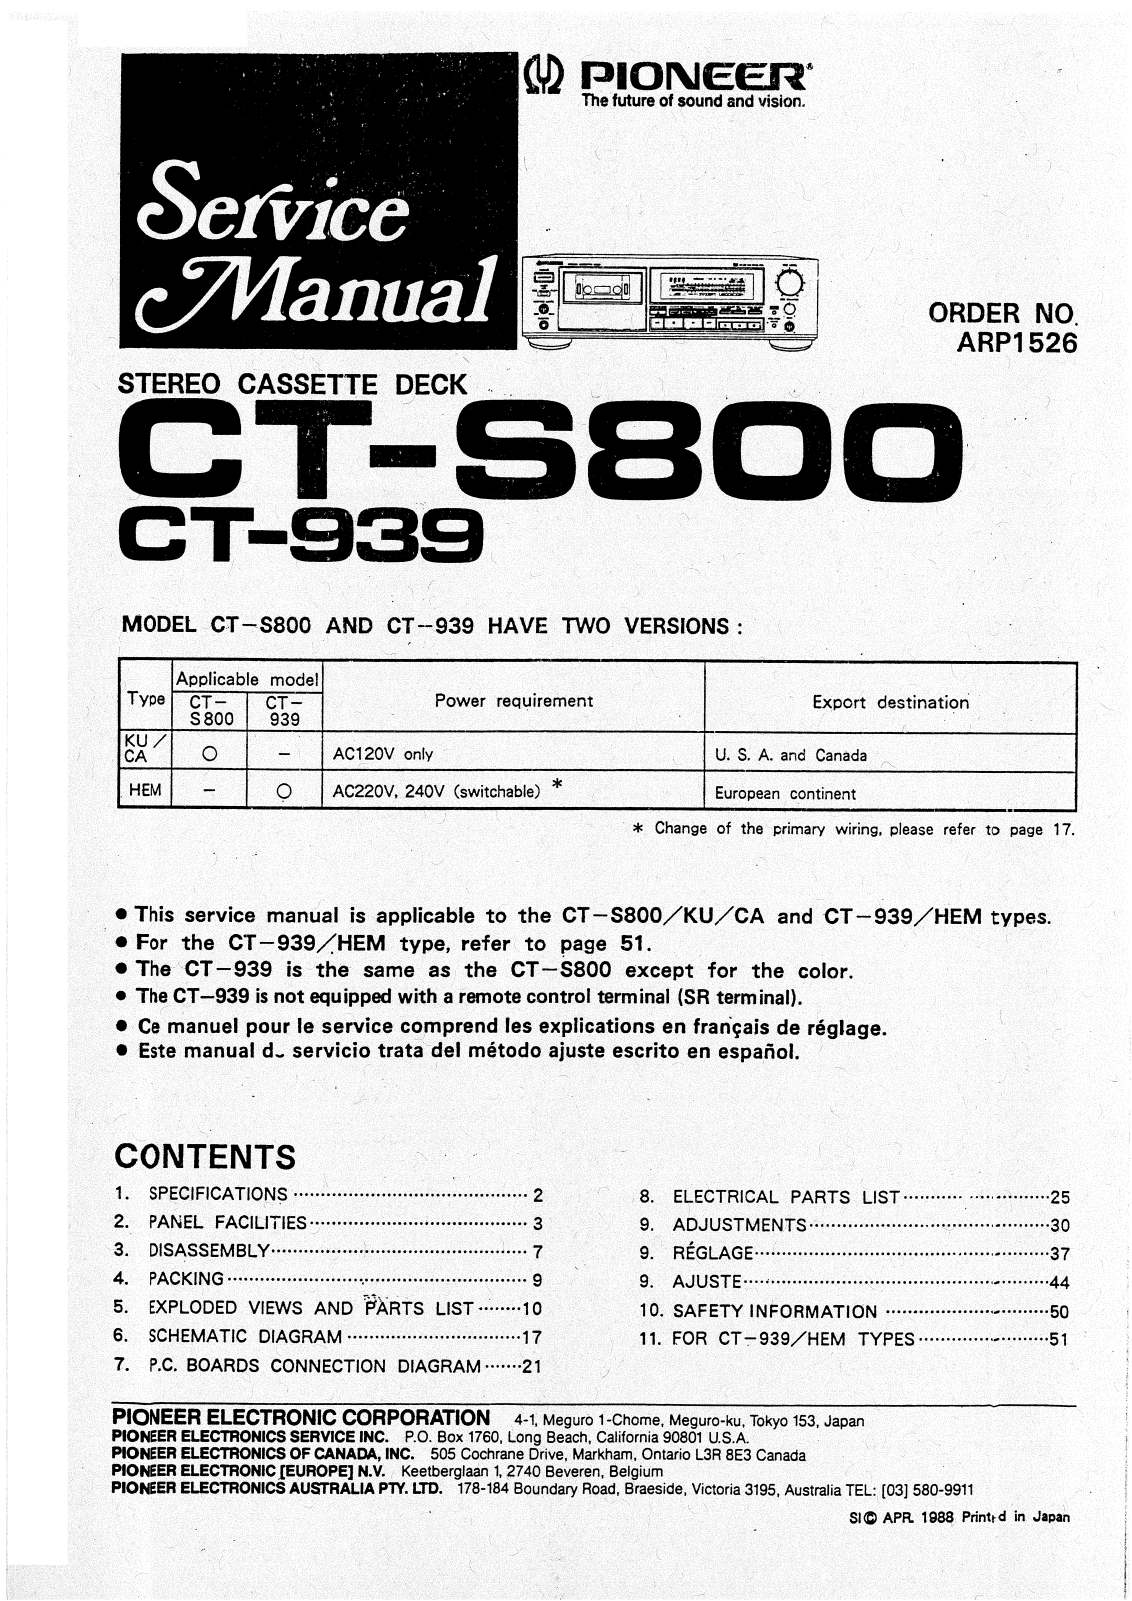 Pioneer CT-939, CTS-800 Service manual